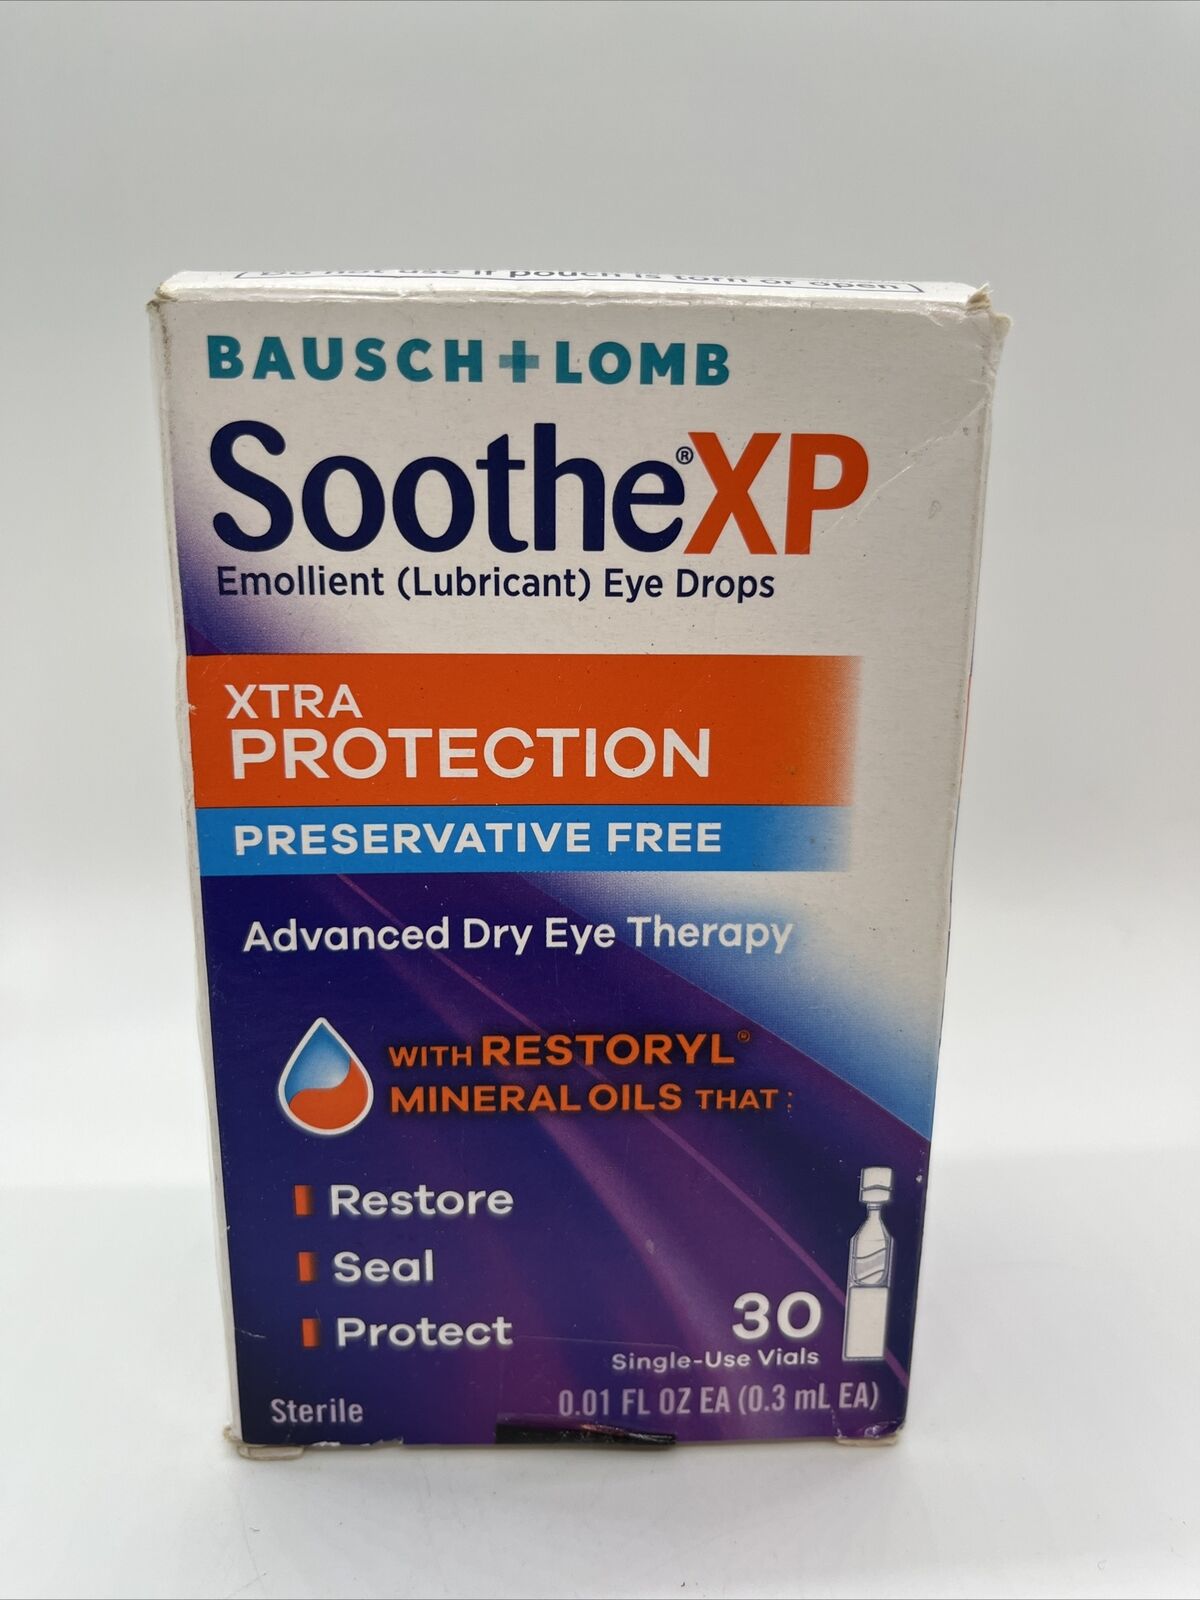 Bausch & Lomb SootheXP Extra Protection 30 Vials